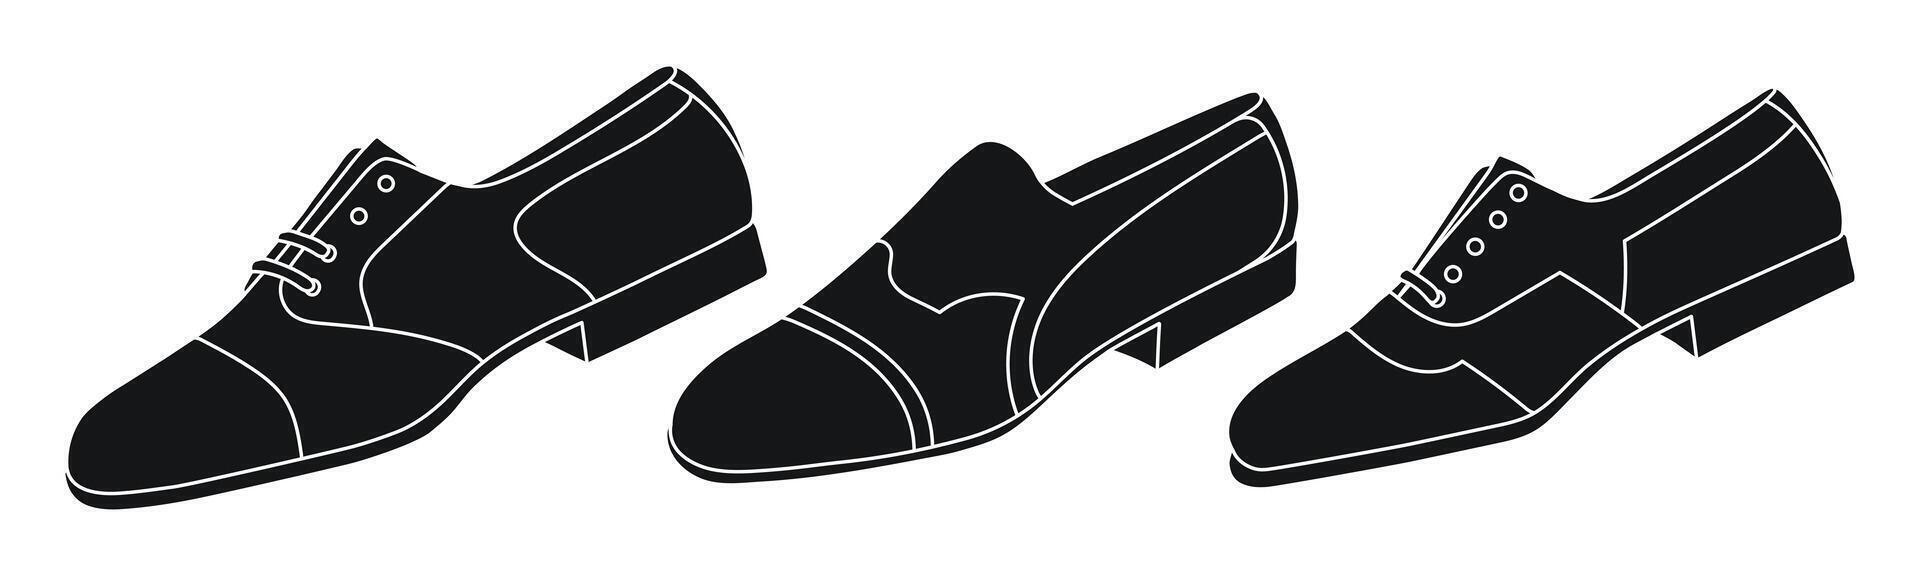 Sketch silhouette of mens low shoes, isolated vector